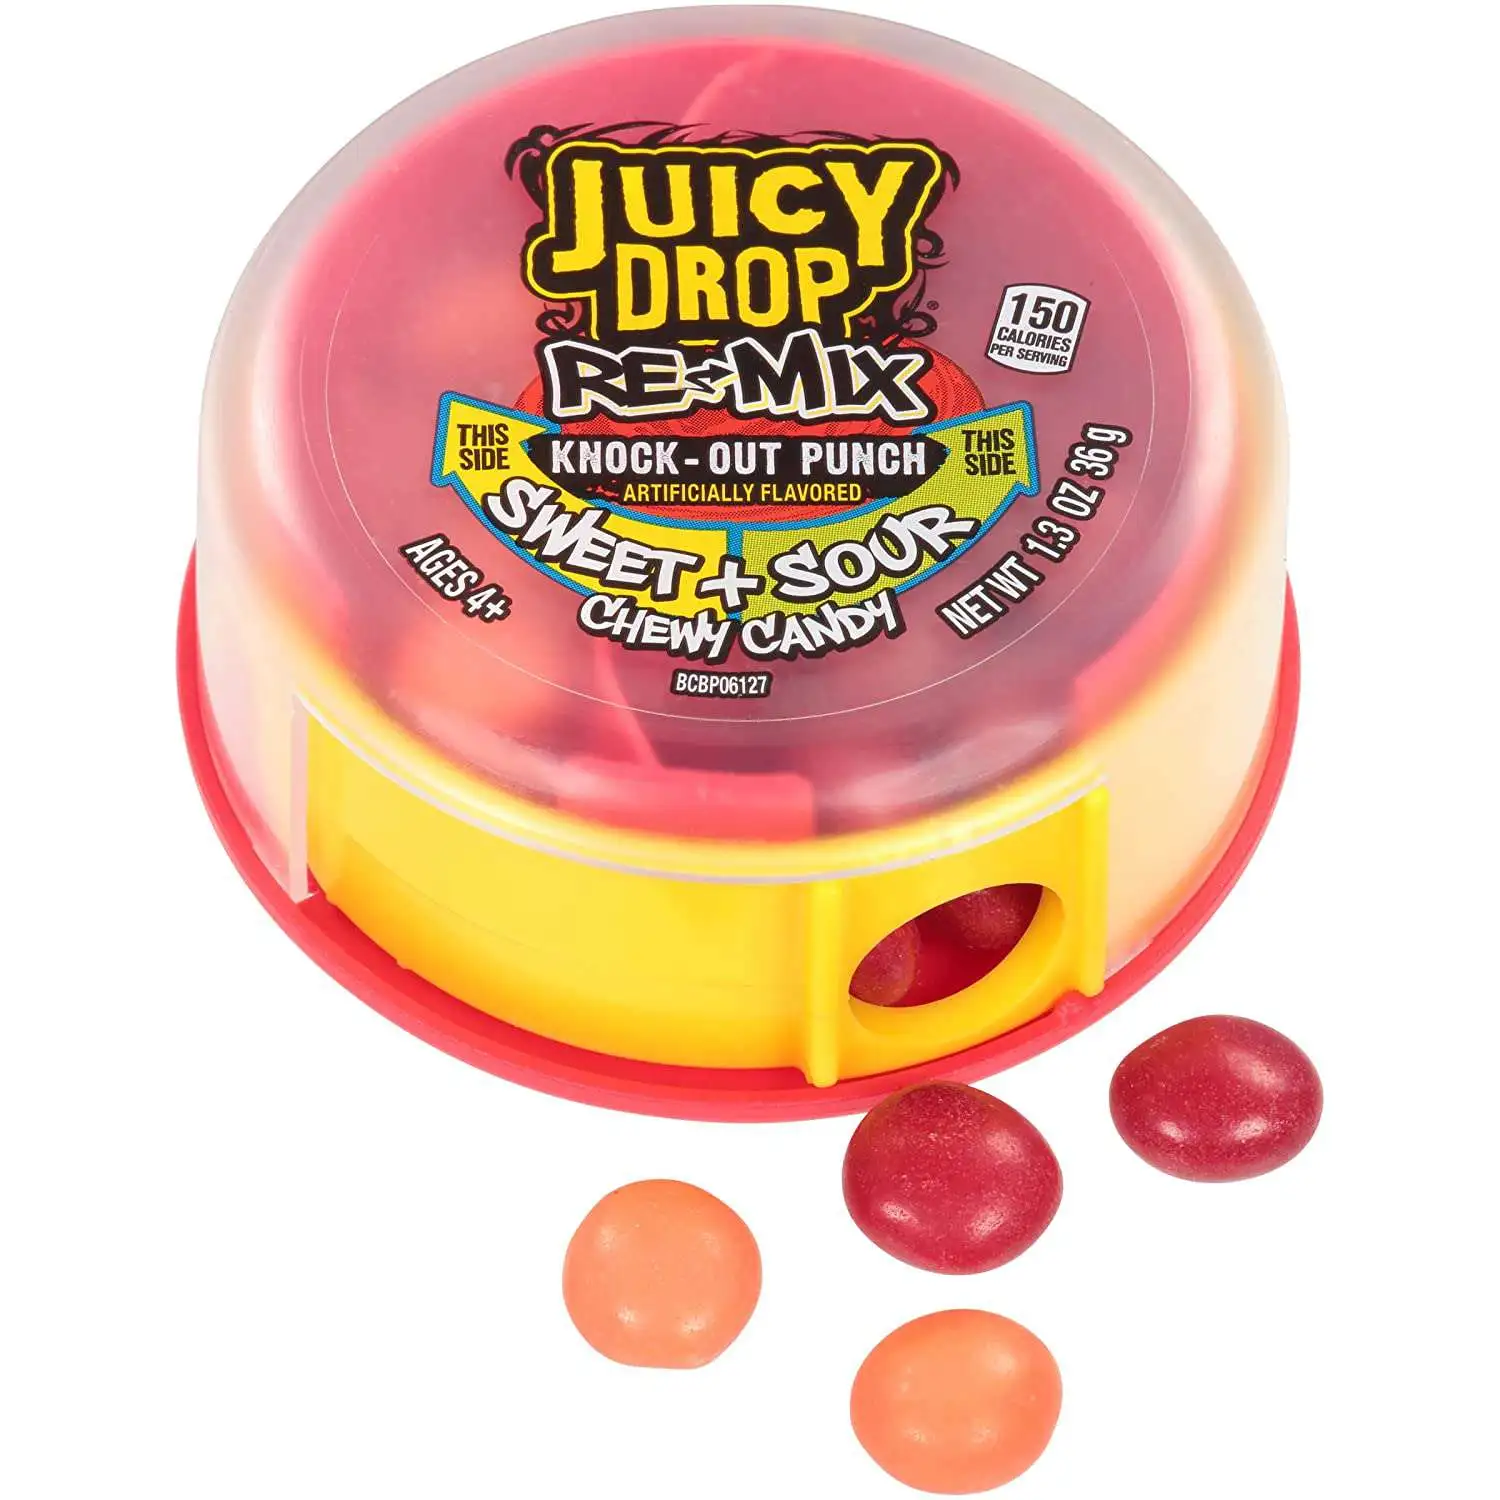 Juicy Drops Re-Mix Knock-Out Punch 1.3 Oz. Sweet Sour Chewy Candy Topps -  ToyWiz